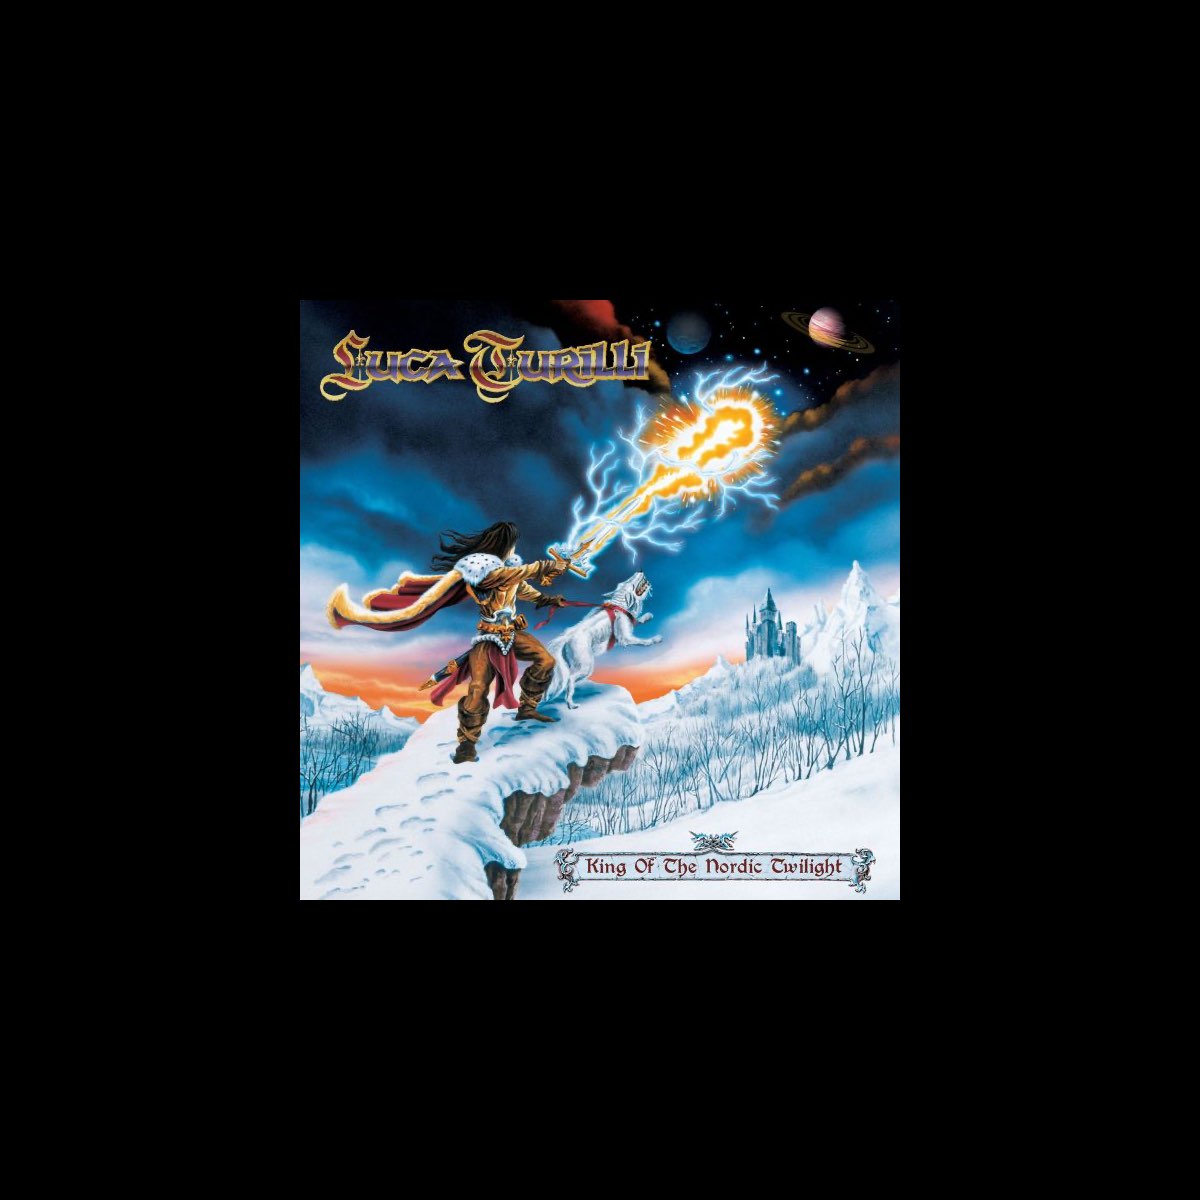 King of the Nordic Twilight by Luca Turilli (Band) on Apple Music